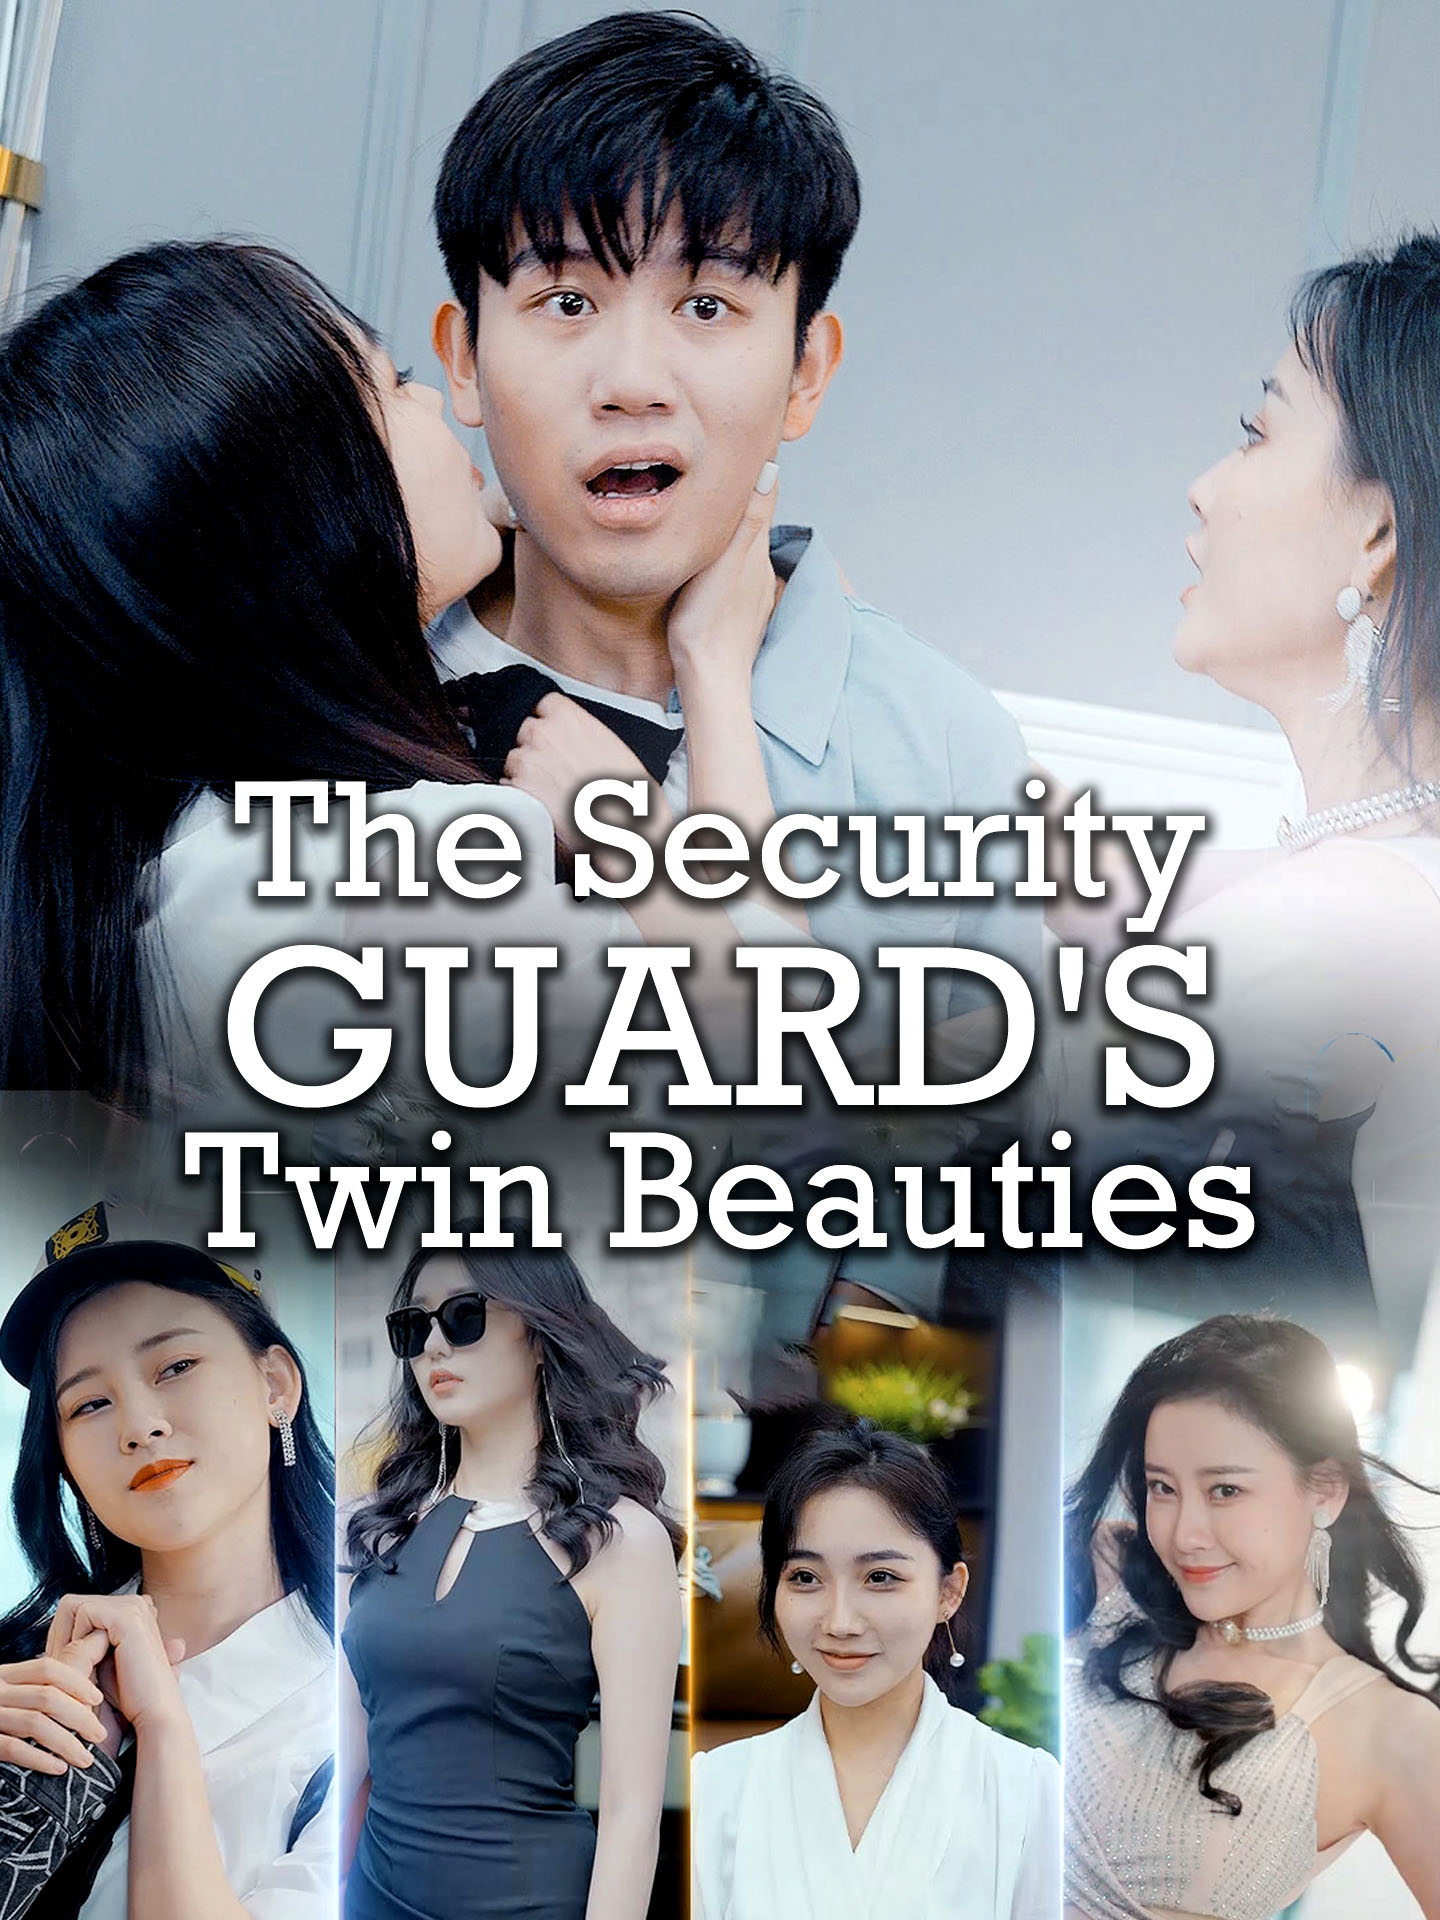 The Security Guard’s Twin Beauties